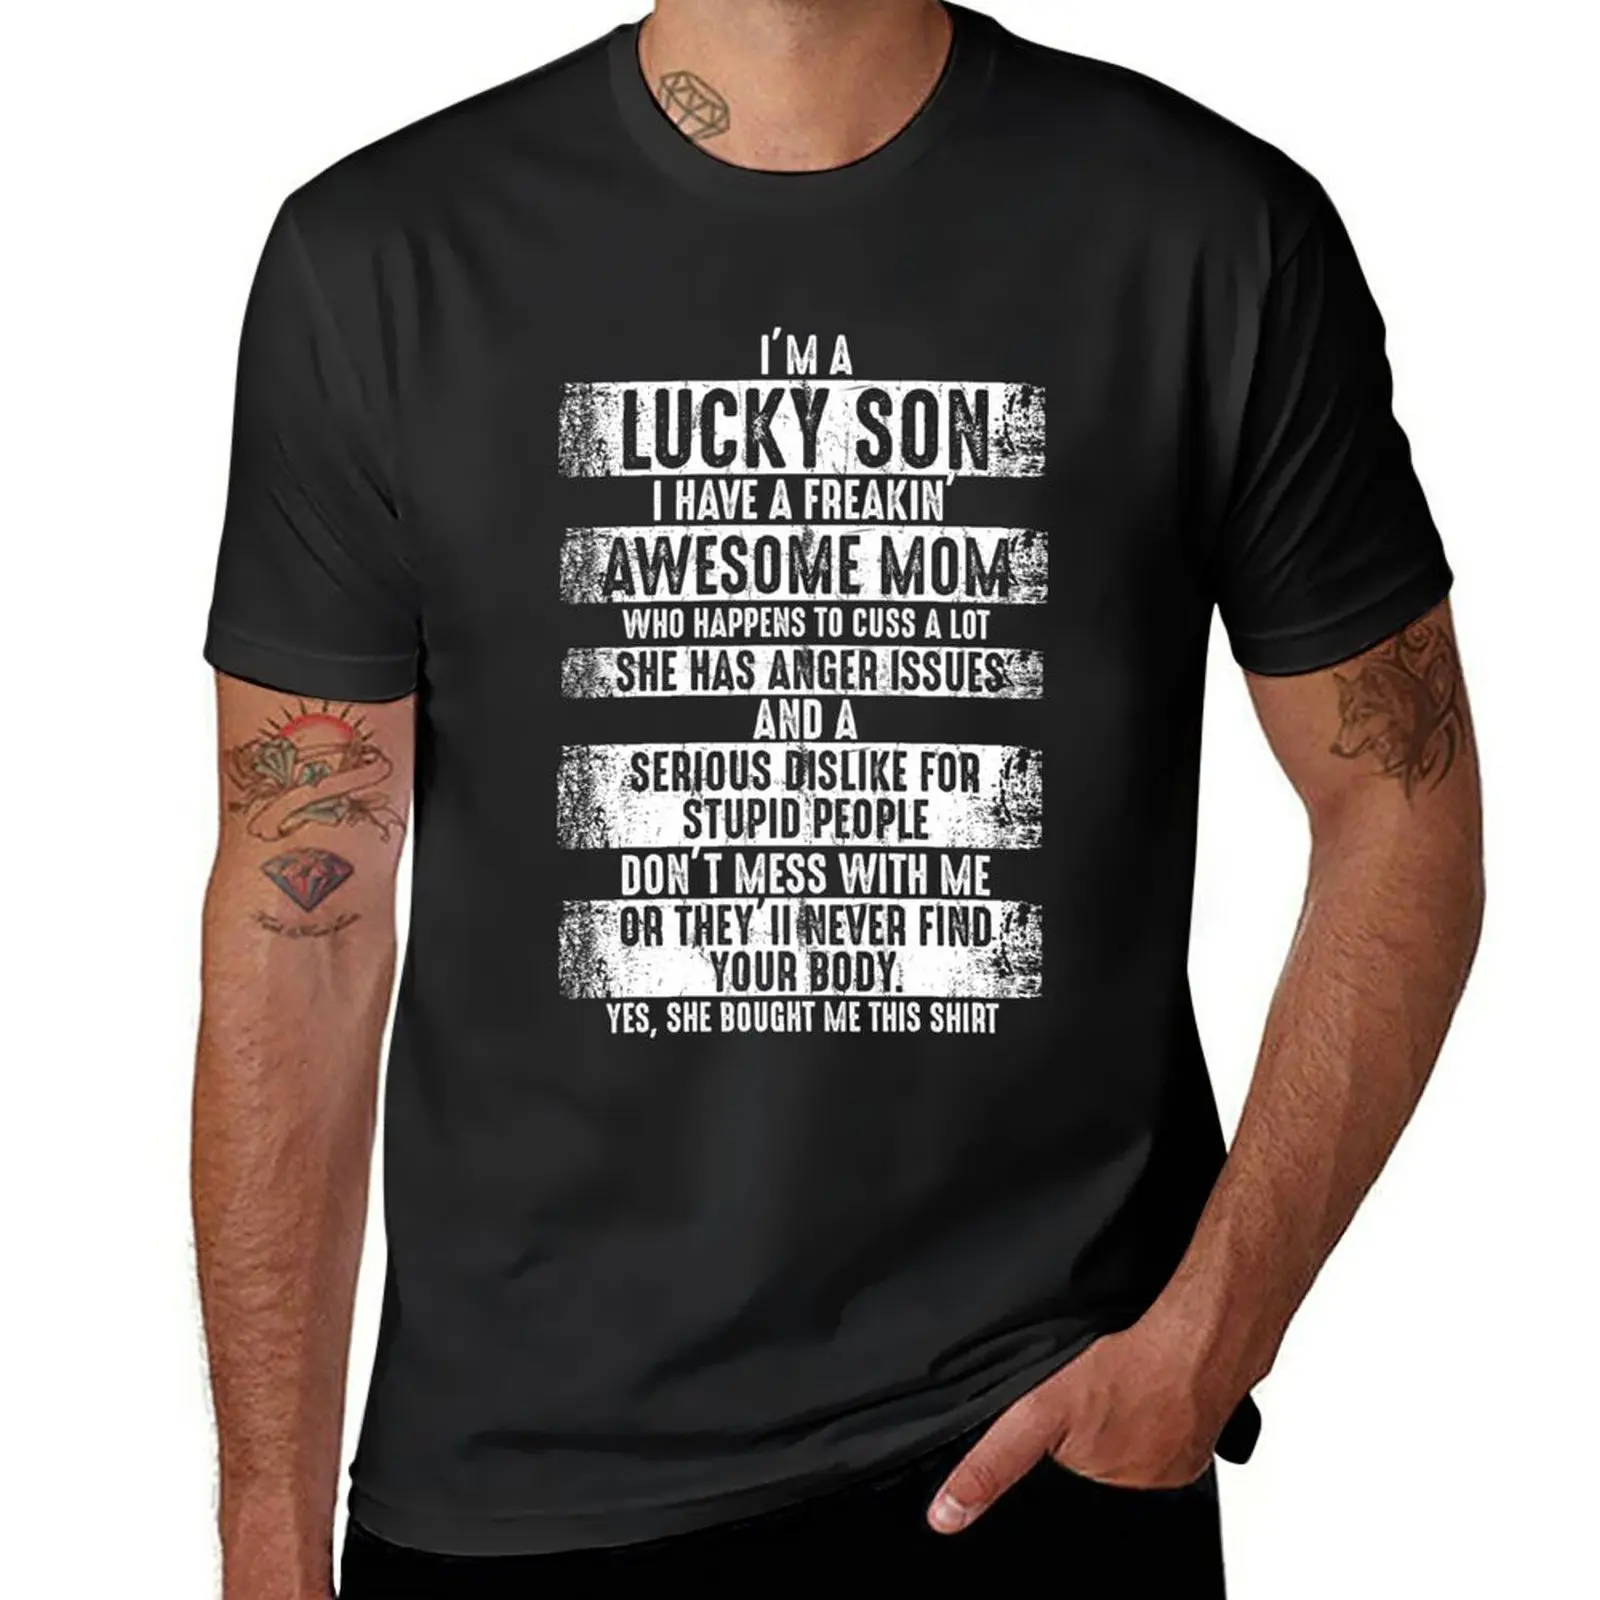 

New I'm a lucky son I have a freaking awesome mom T-Shirt t shirt man custom t shirts design your own Short sleeve tee men